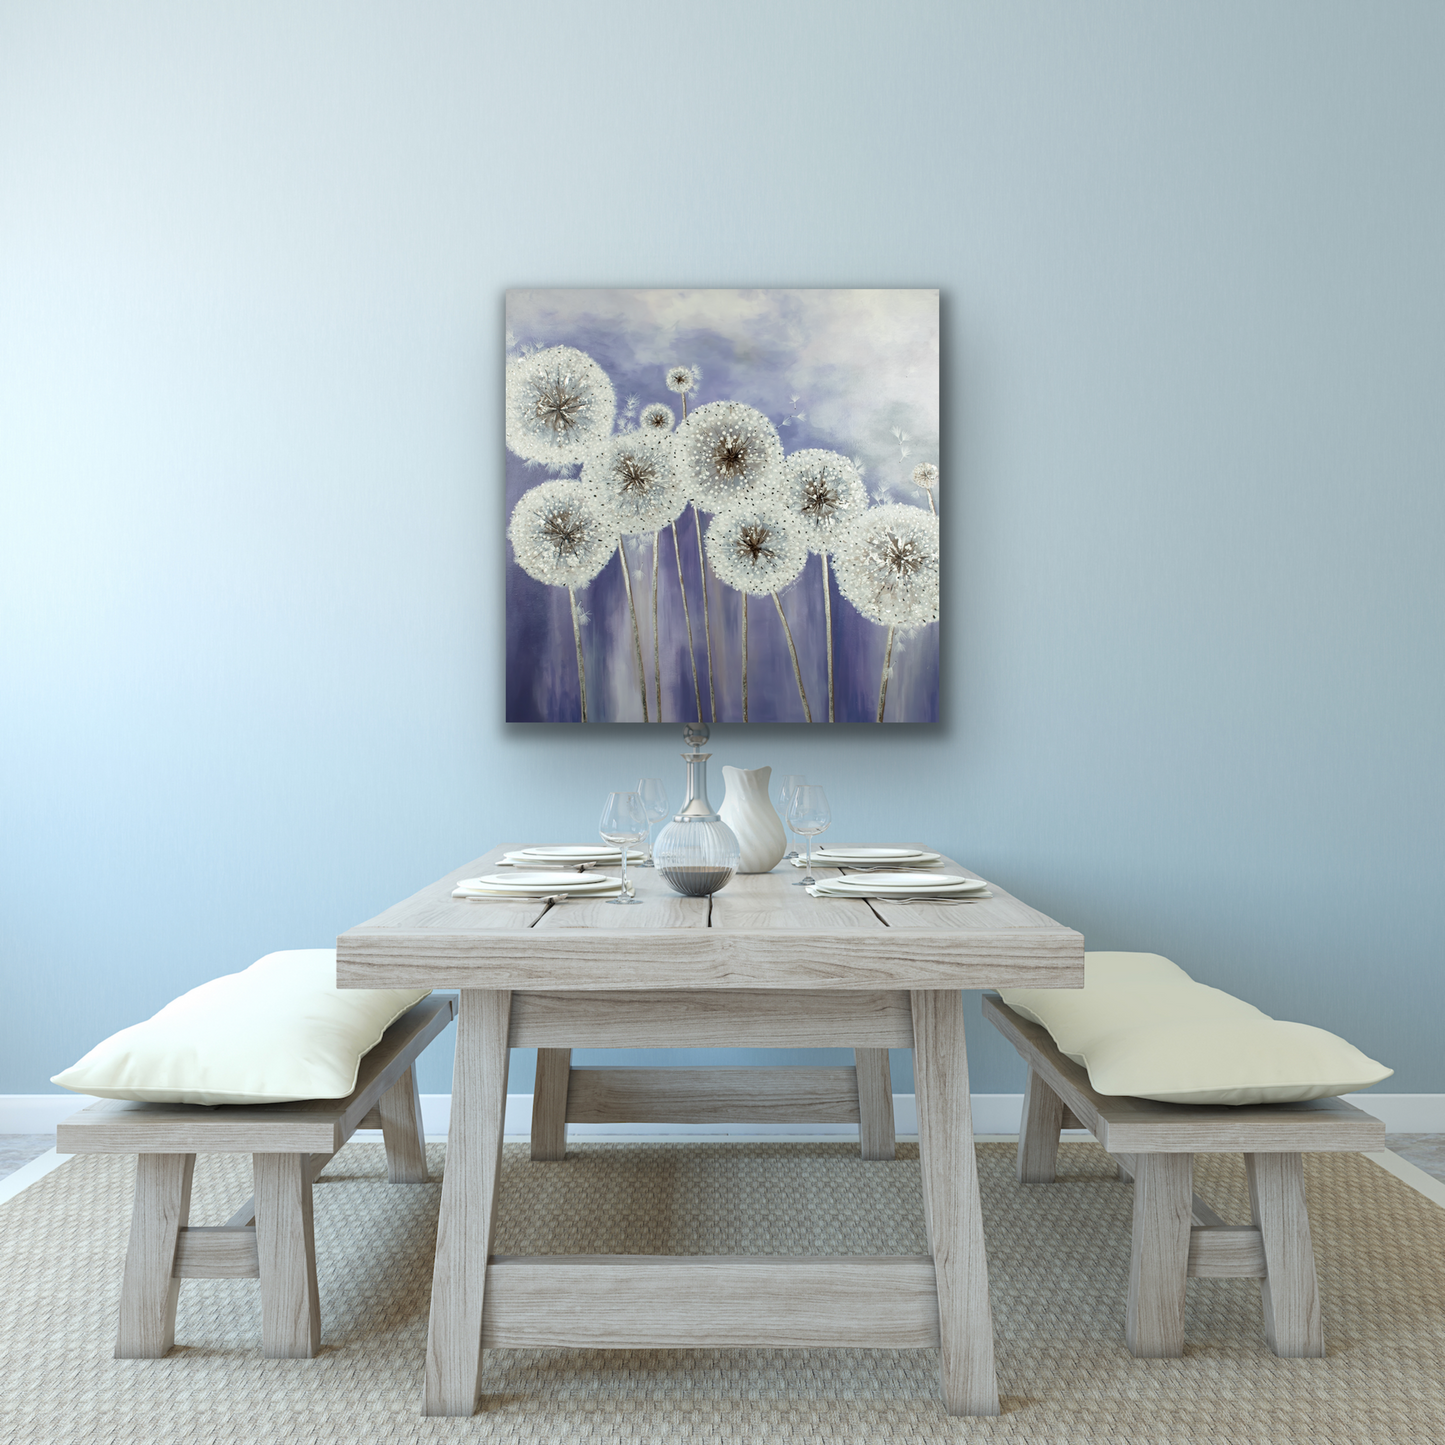 "Touchee" art of work will look great in your dining room, bedroom or living room.